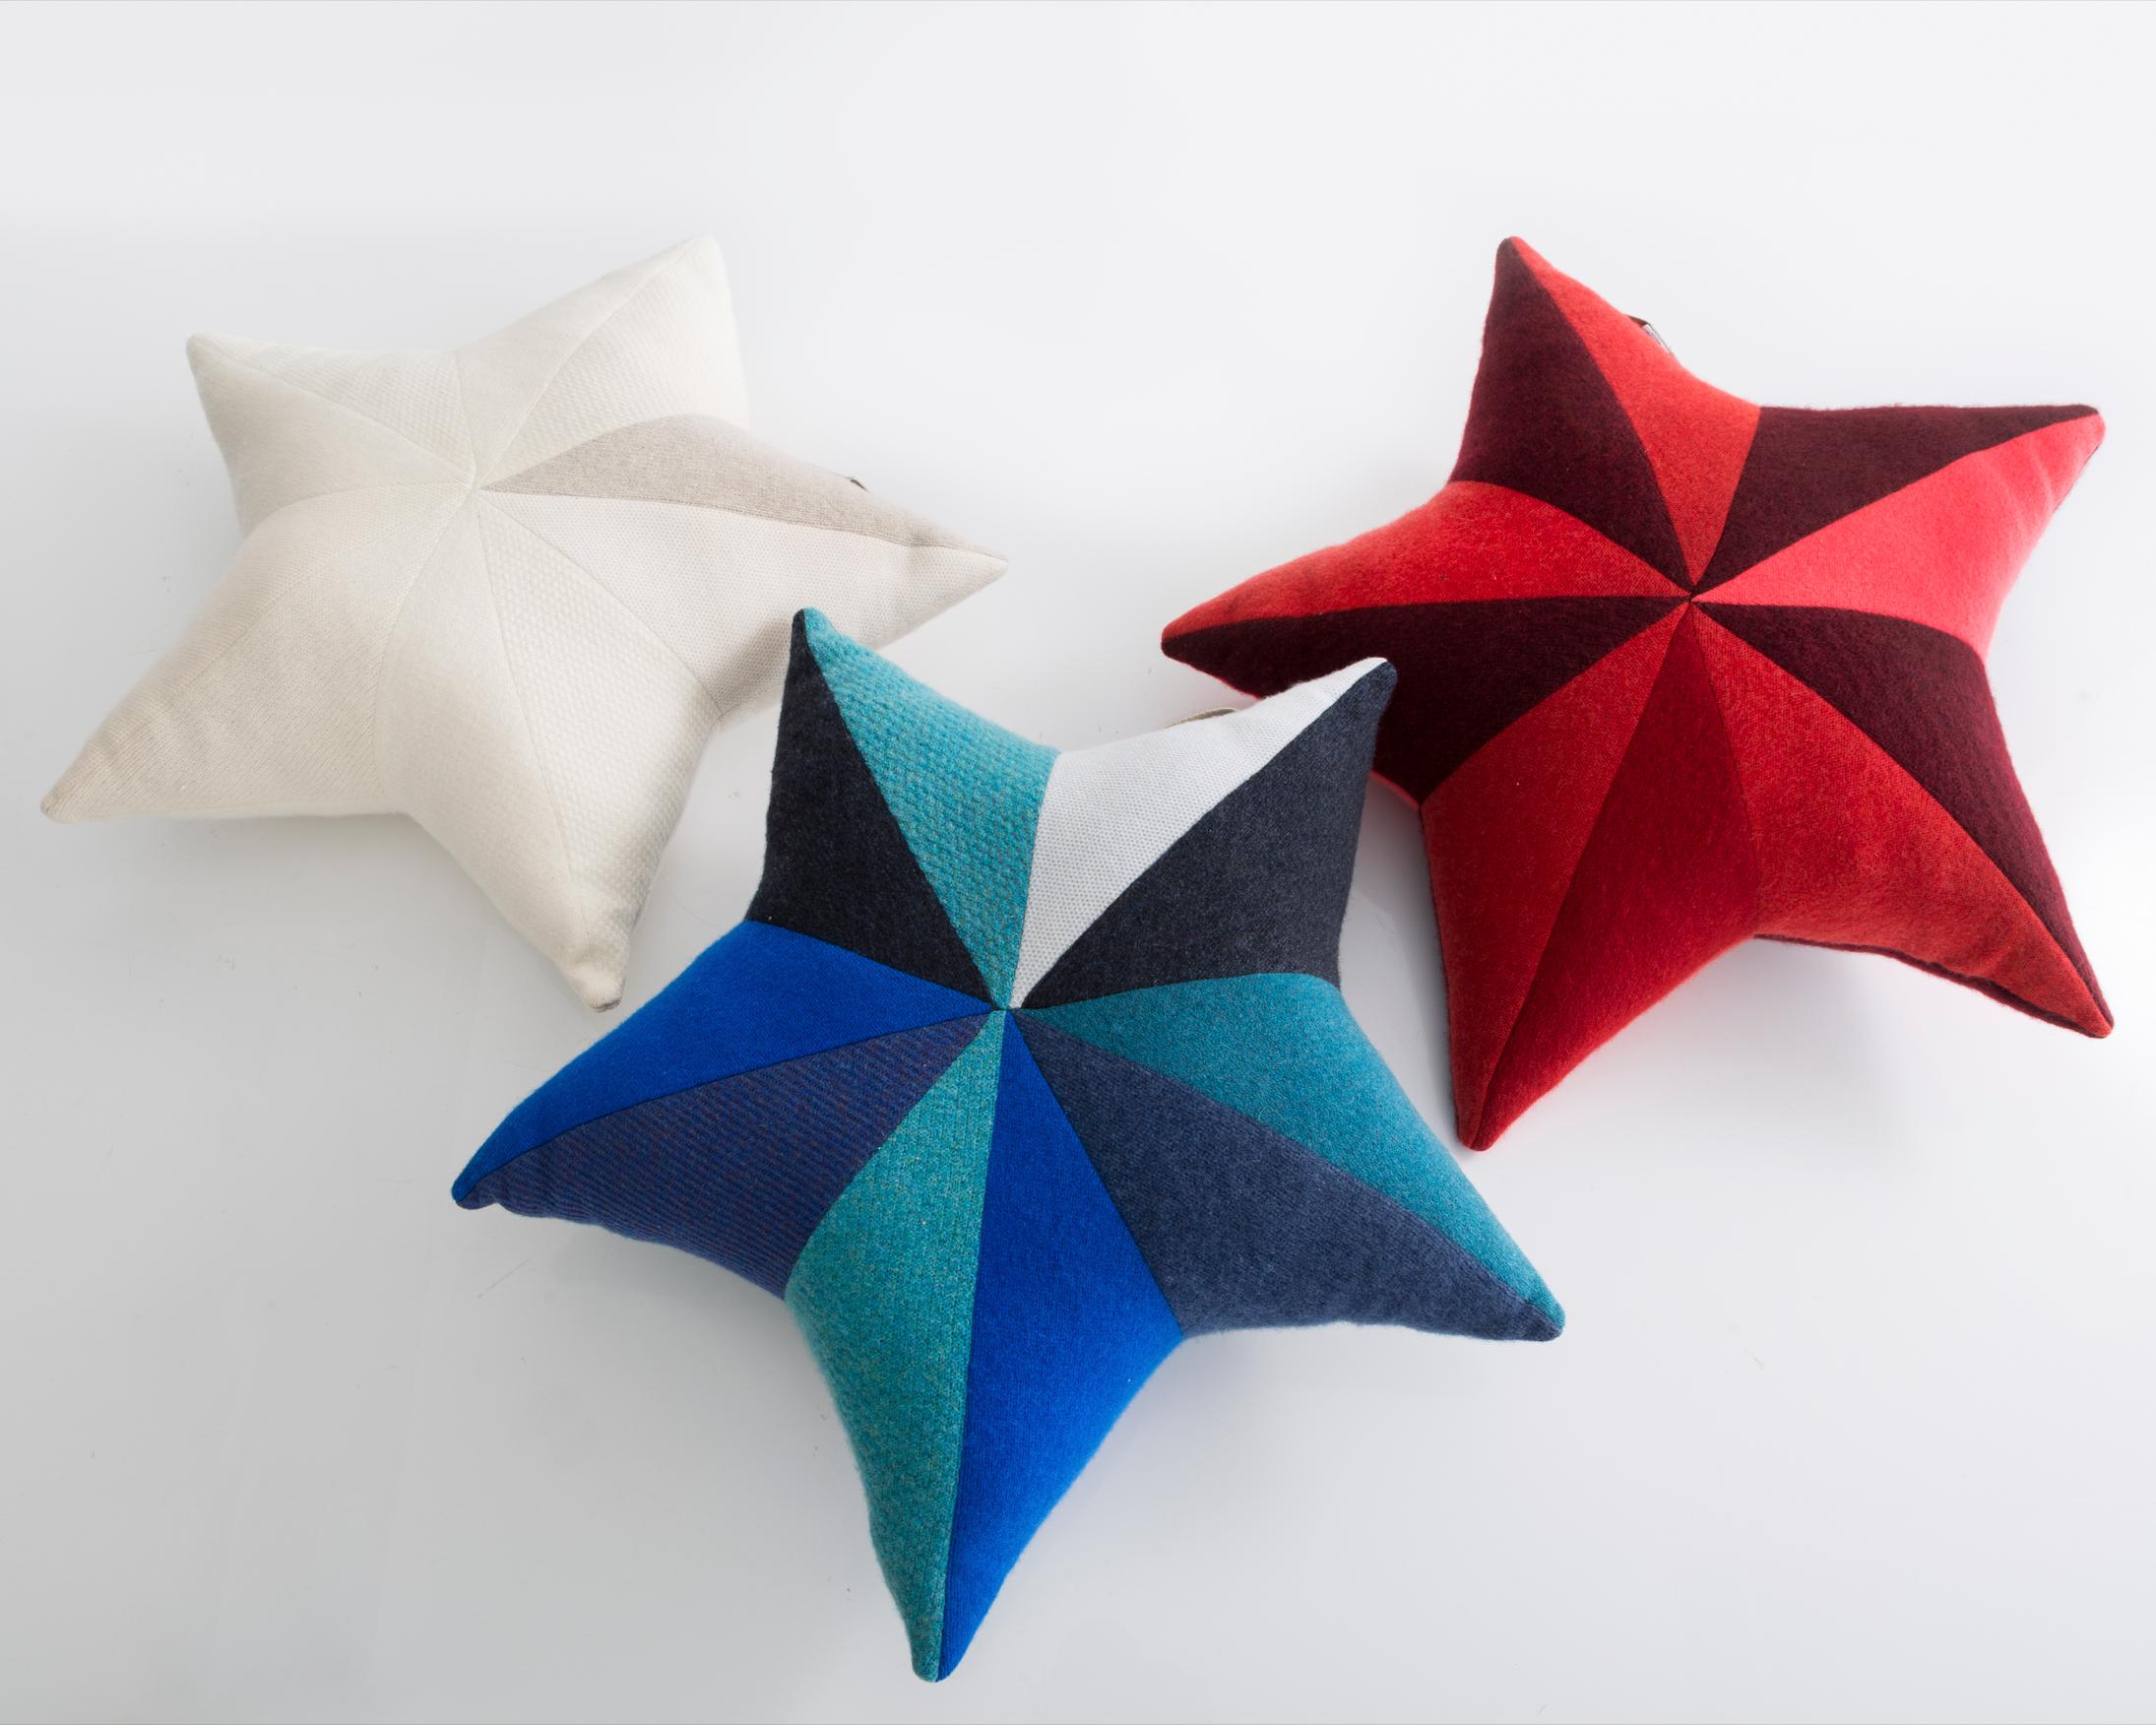 Modern Star-Shaped Patchwordk Pillow in White Cashmere by Greg Chait, 2017